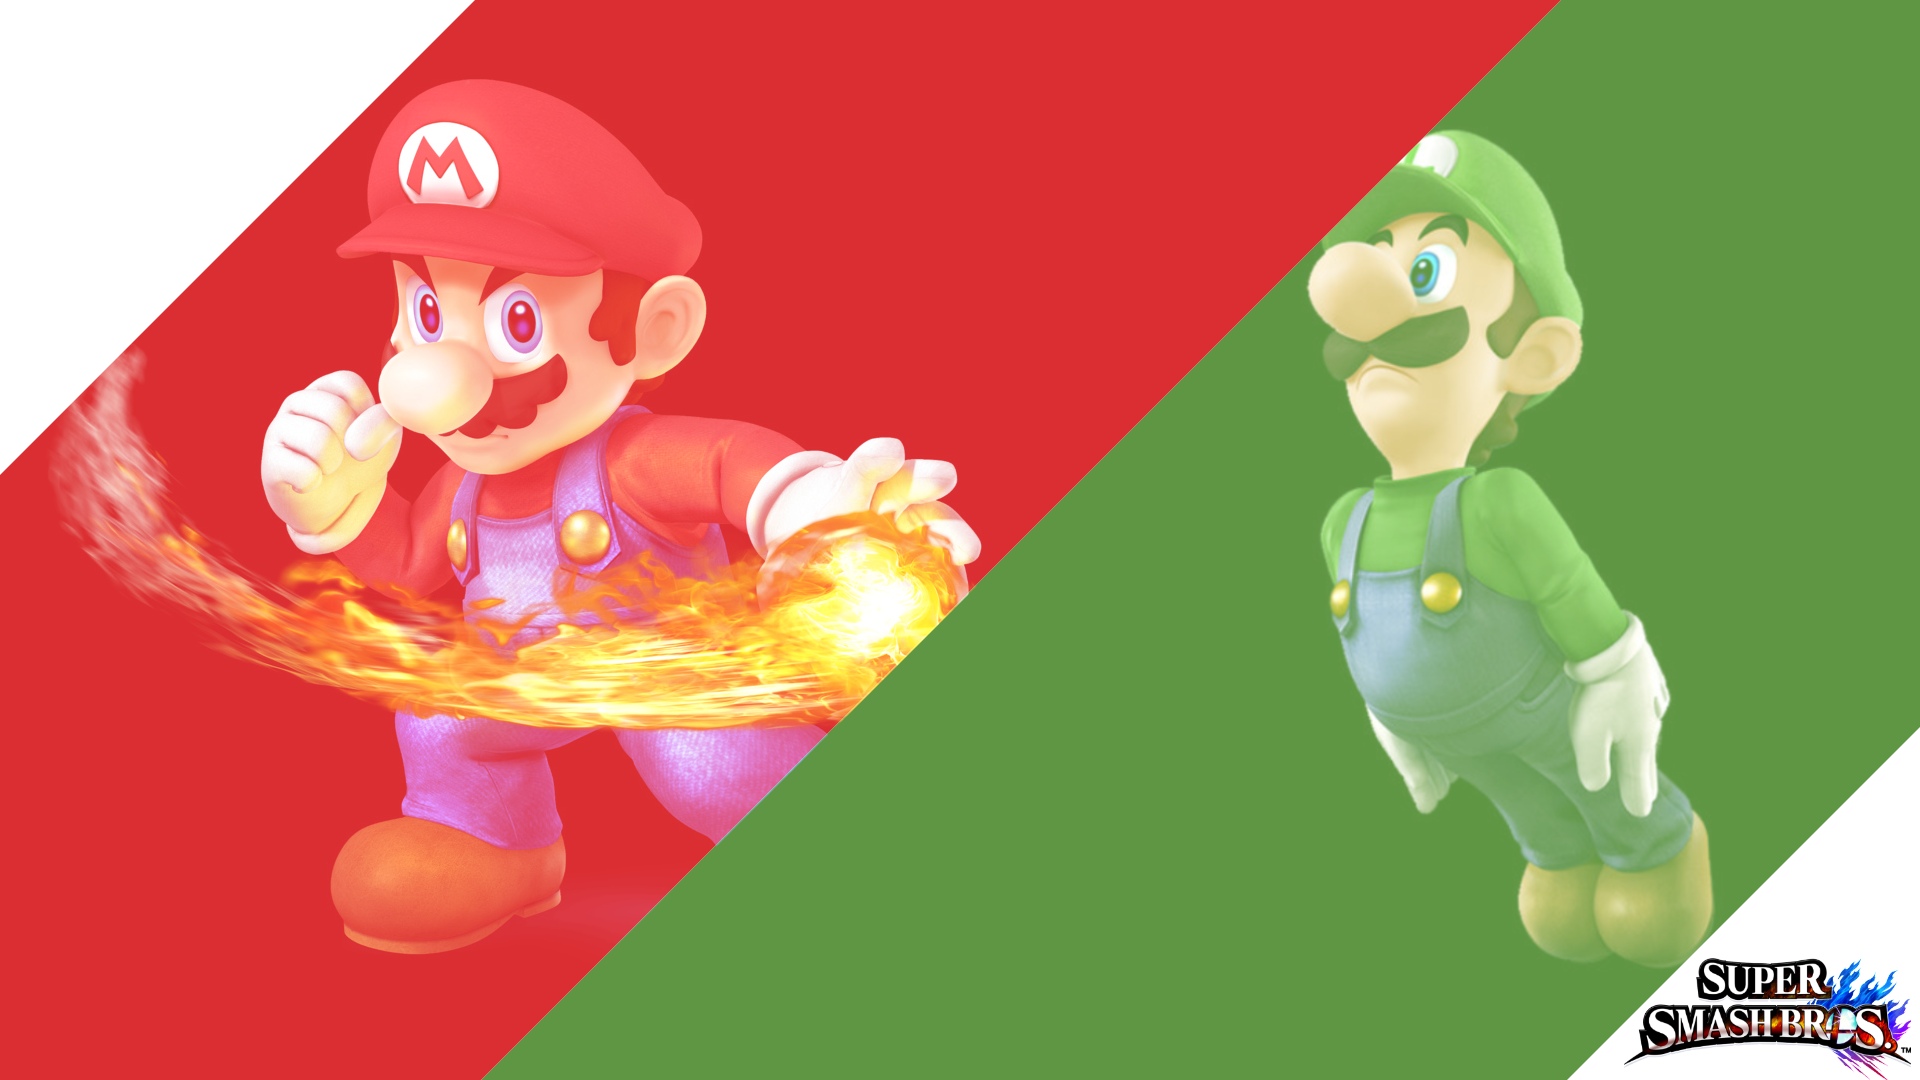 Video Game Super Smash Bros. for Nintendo 3DS and Wii U HD Wallpaper | Background Image